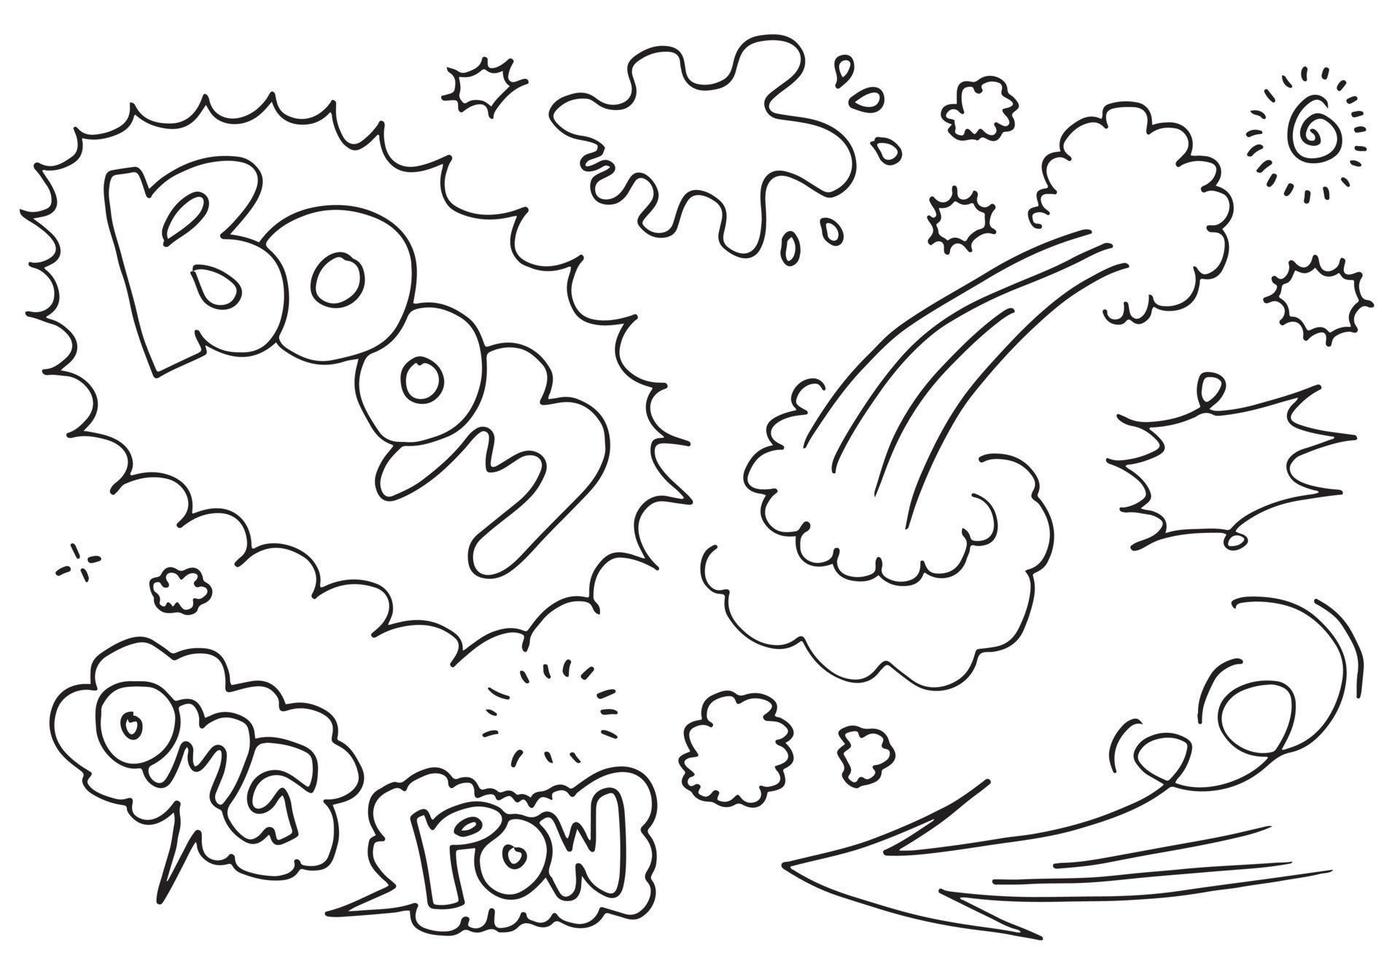 Hand drawn comic doodles on white background. vector